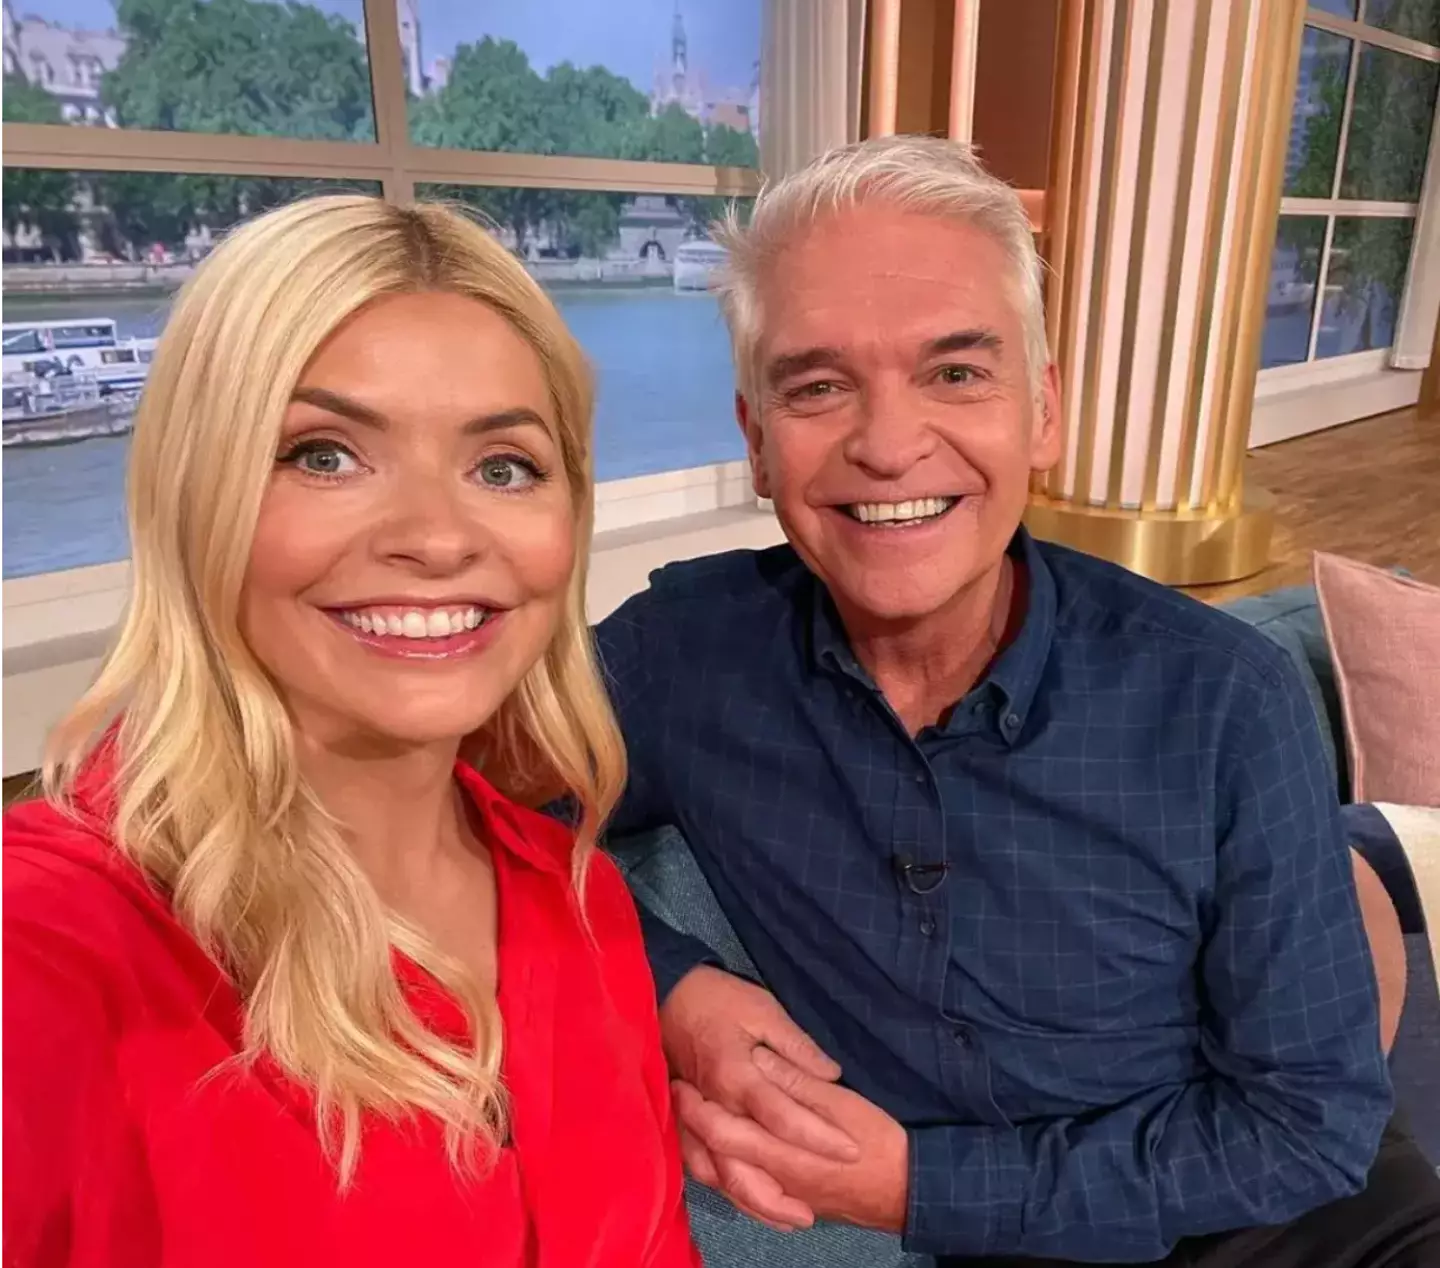 Many viewers felt the recent scandal with Phillip Schofield had affected the show's chances at pulling an award.